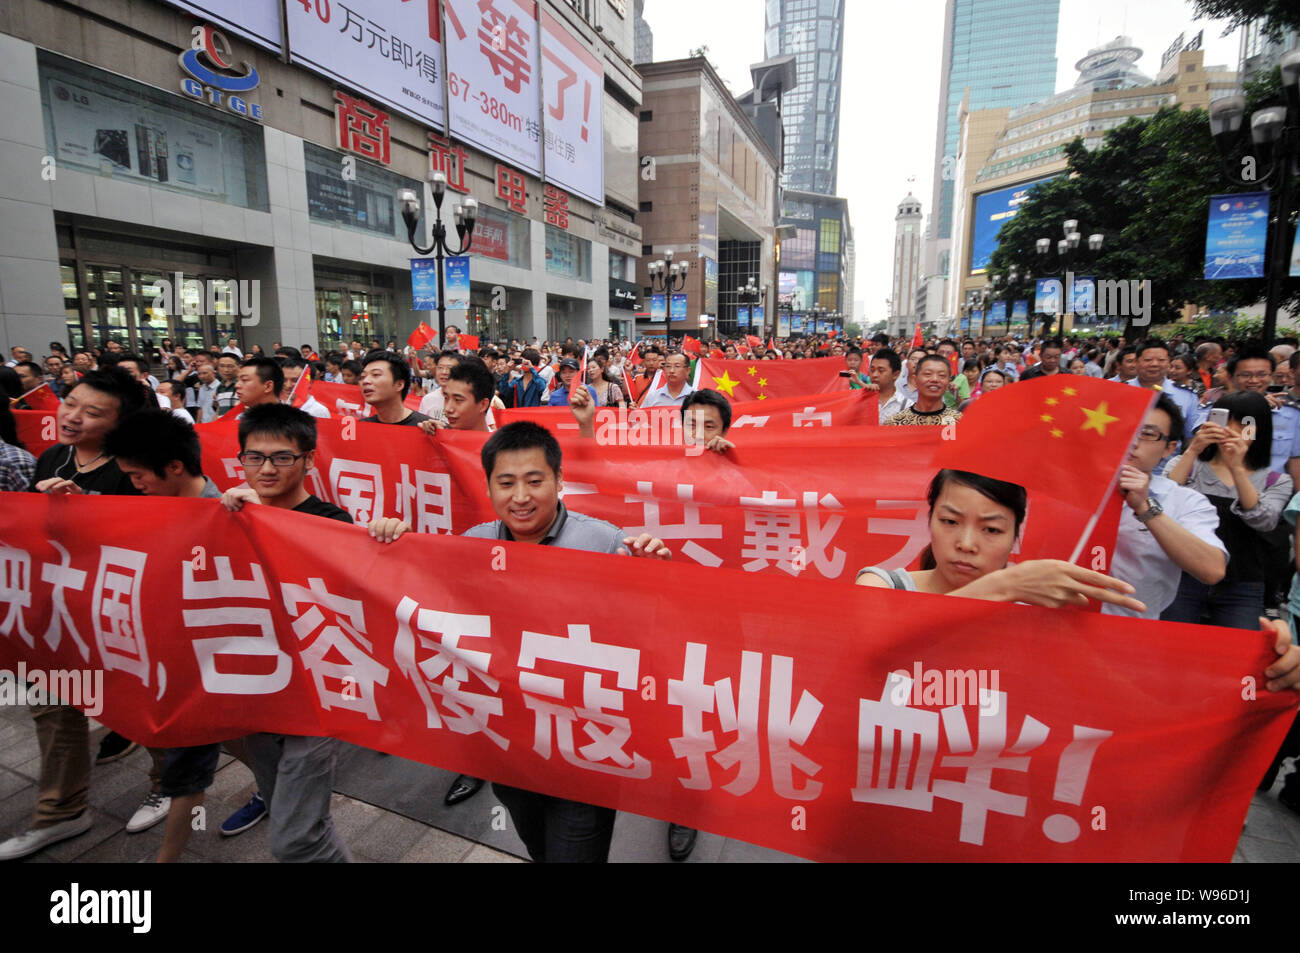 Chinese protestors wave Chinese national flags, hold up banners and shout slogans during an anti-Japan protest parade in Chongqing, China, 16 Septembe Stock Photo